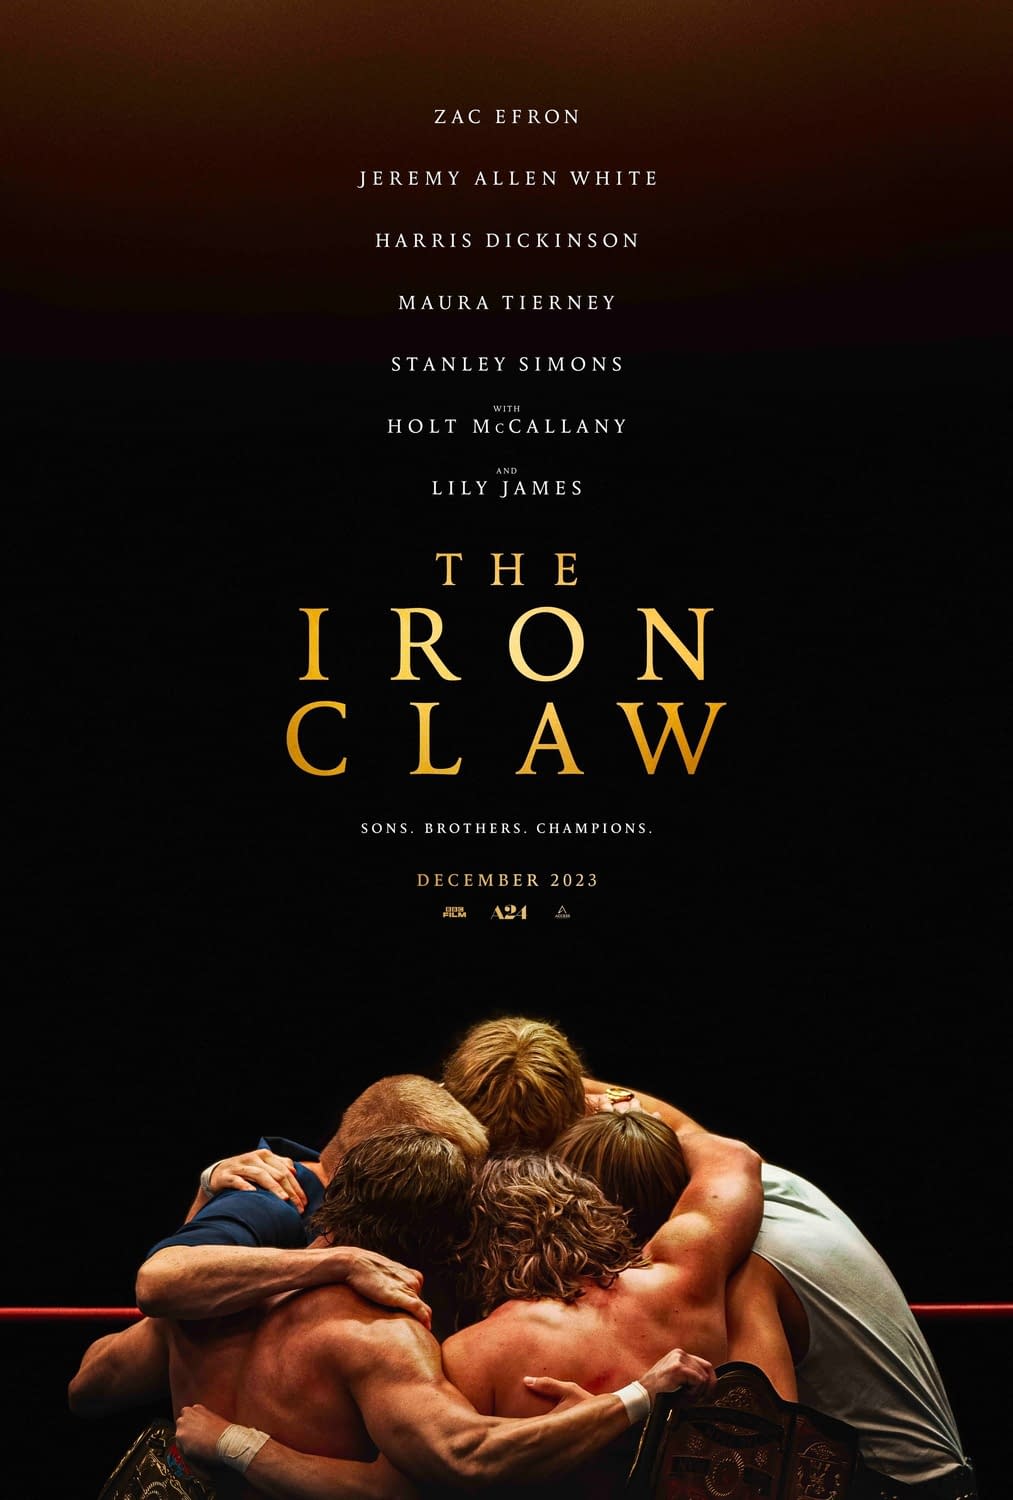 🎥🎬 The Iron Claw | Official Trailer | A24 - Starring Zac Efron, Jeremy ...